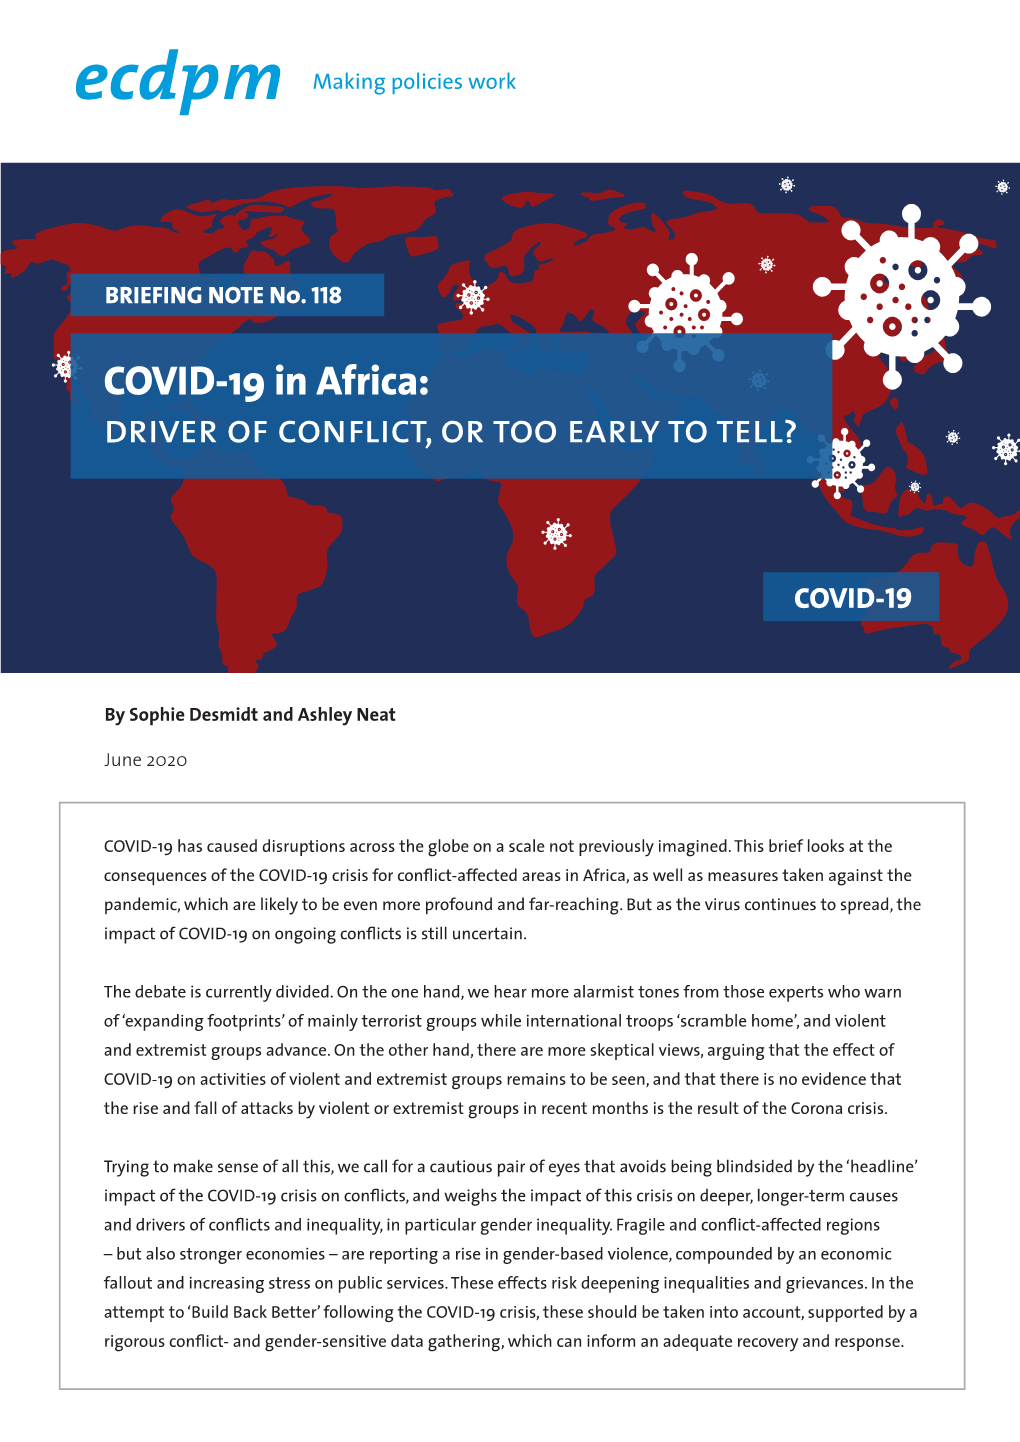 COVID-19 in Africa: Driver of Conflict, Or Too Early to Tell?